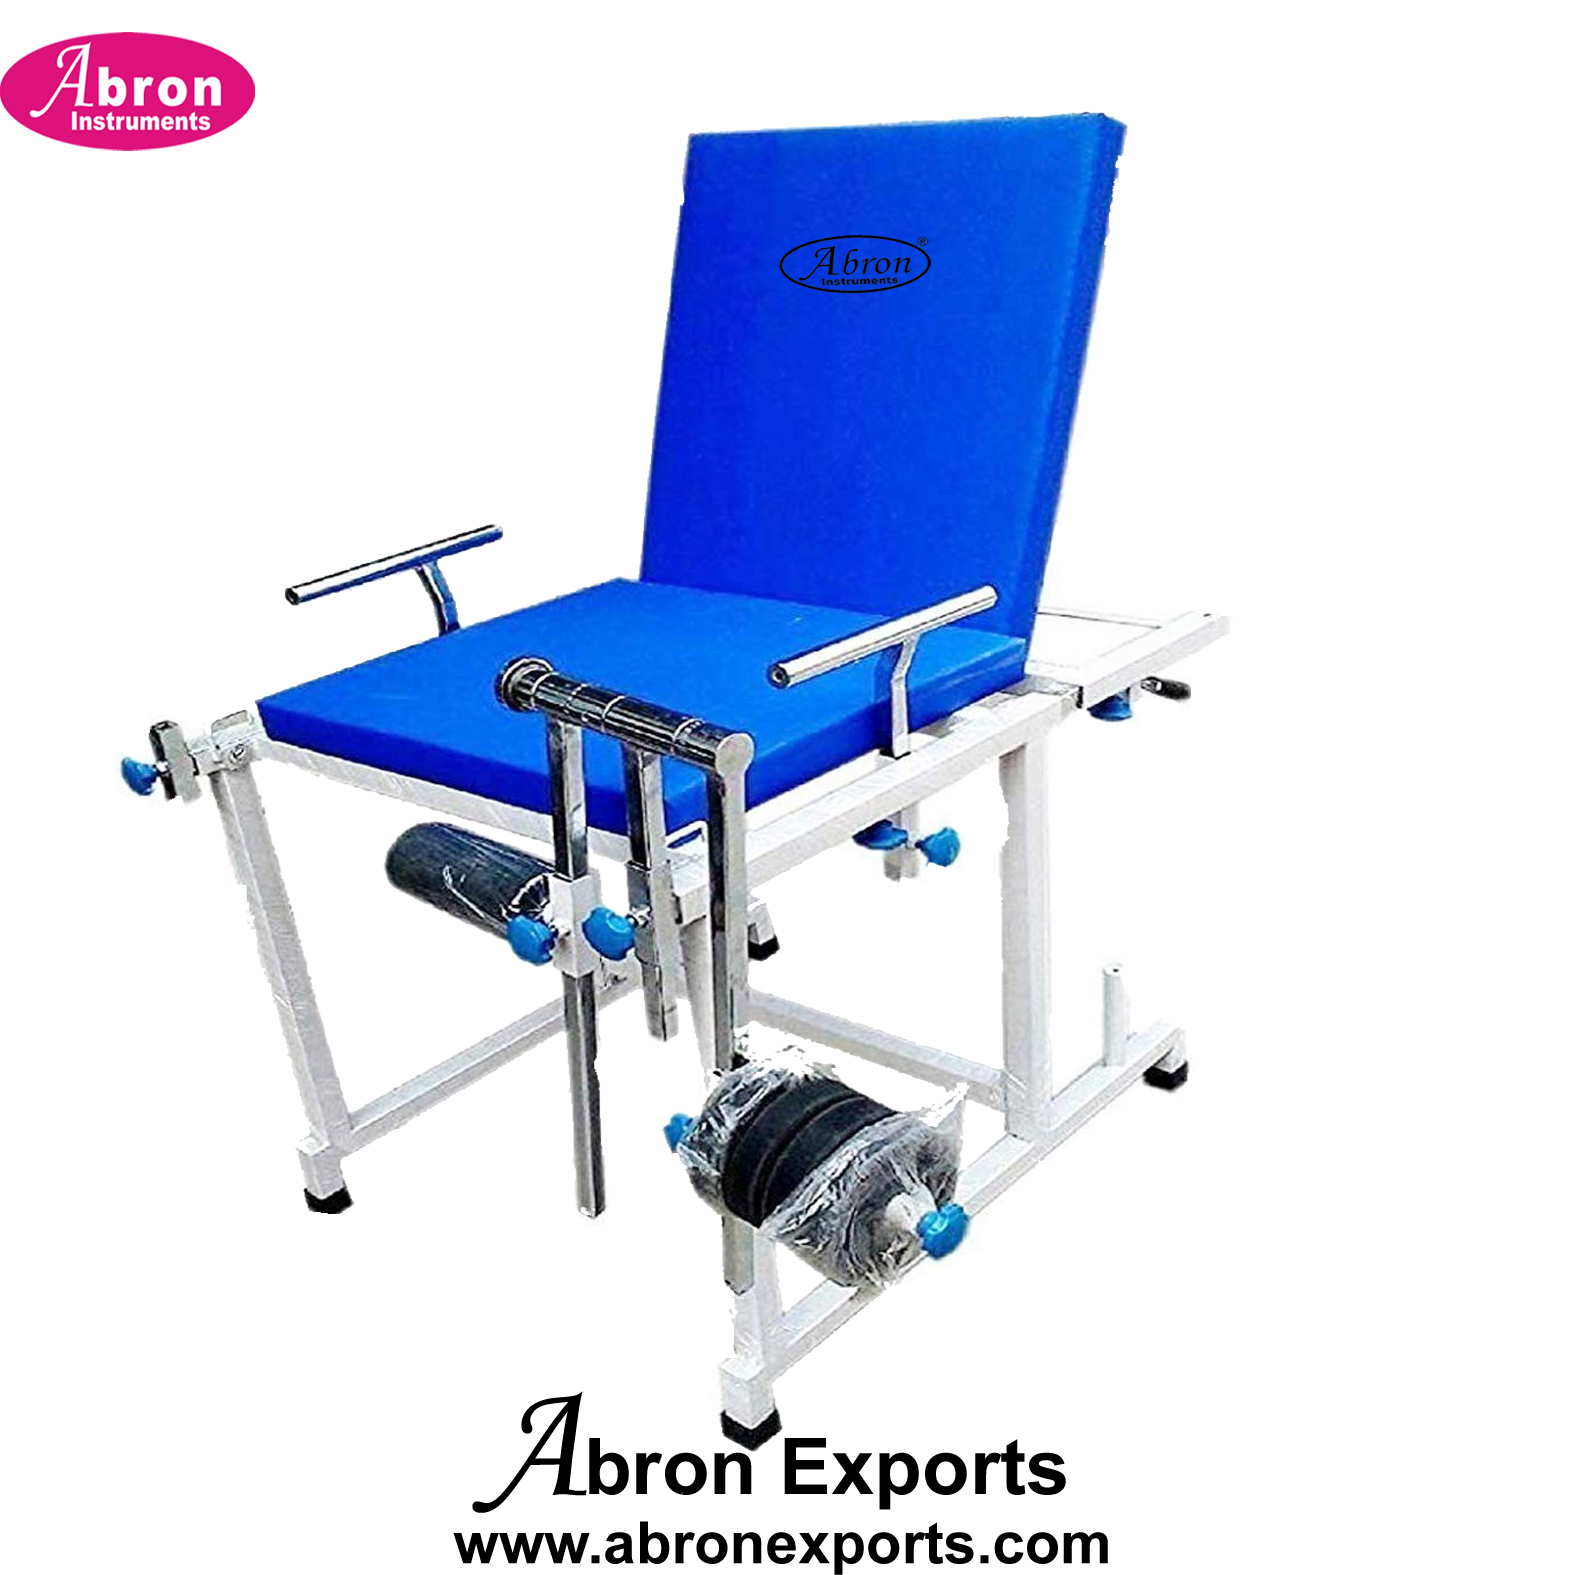 Physiotherapy Chair for Knee Joints Muscles Quadriceps Exercise Table Machine Hospital Medical Abron ABM-1901-CH 